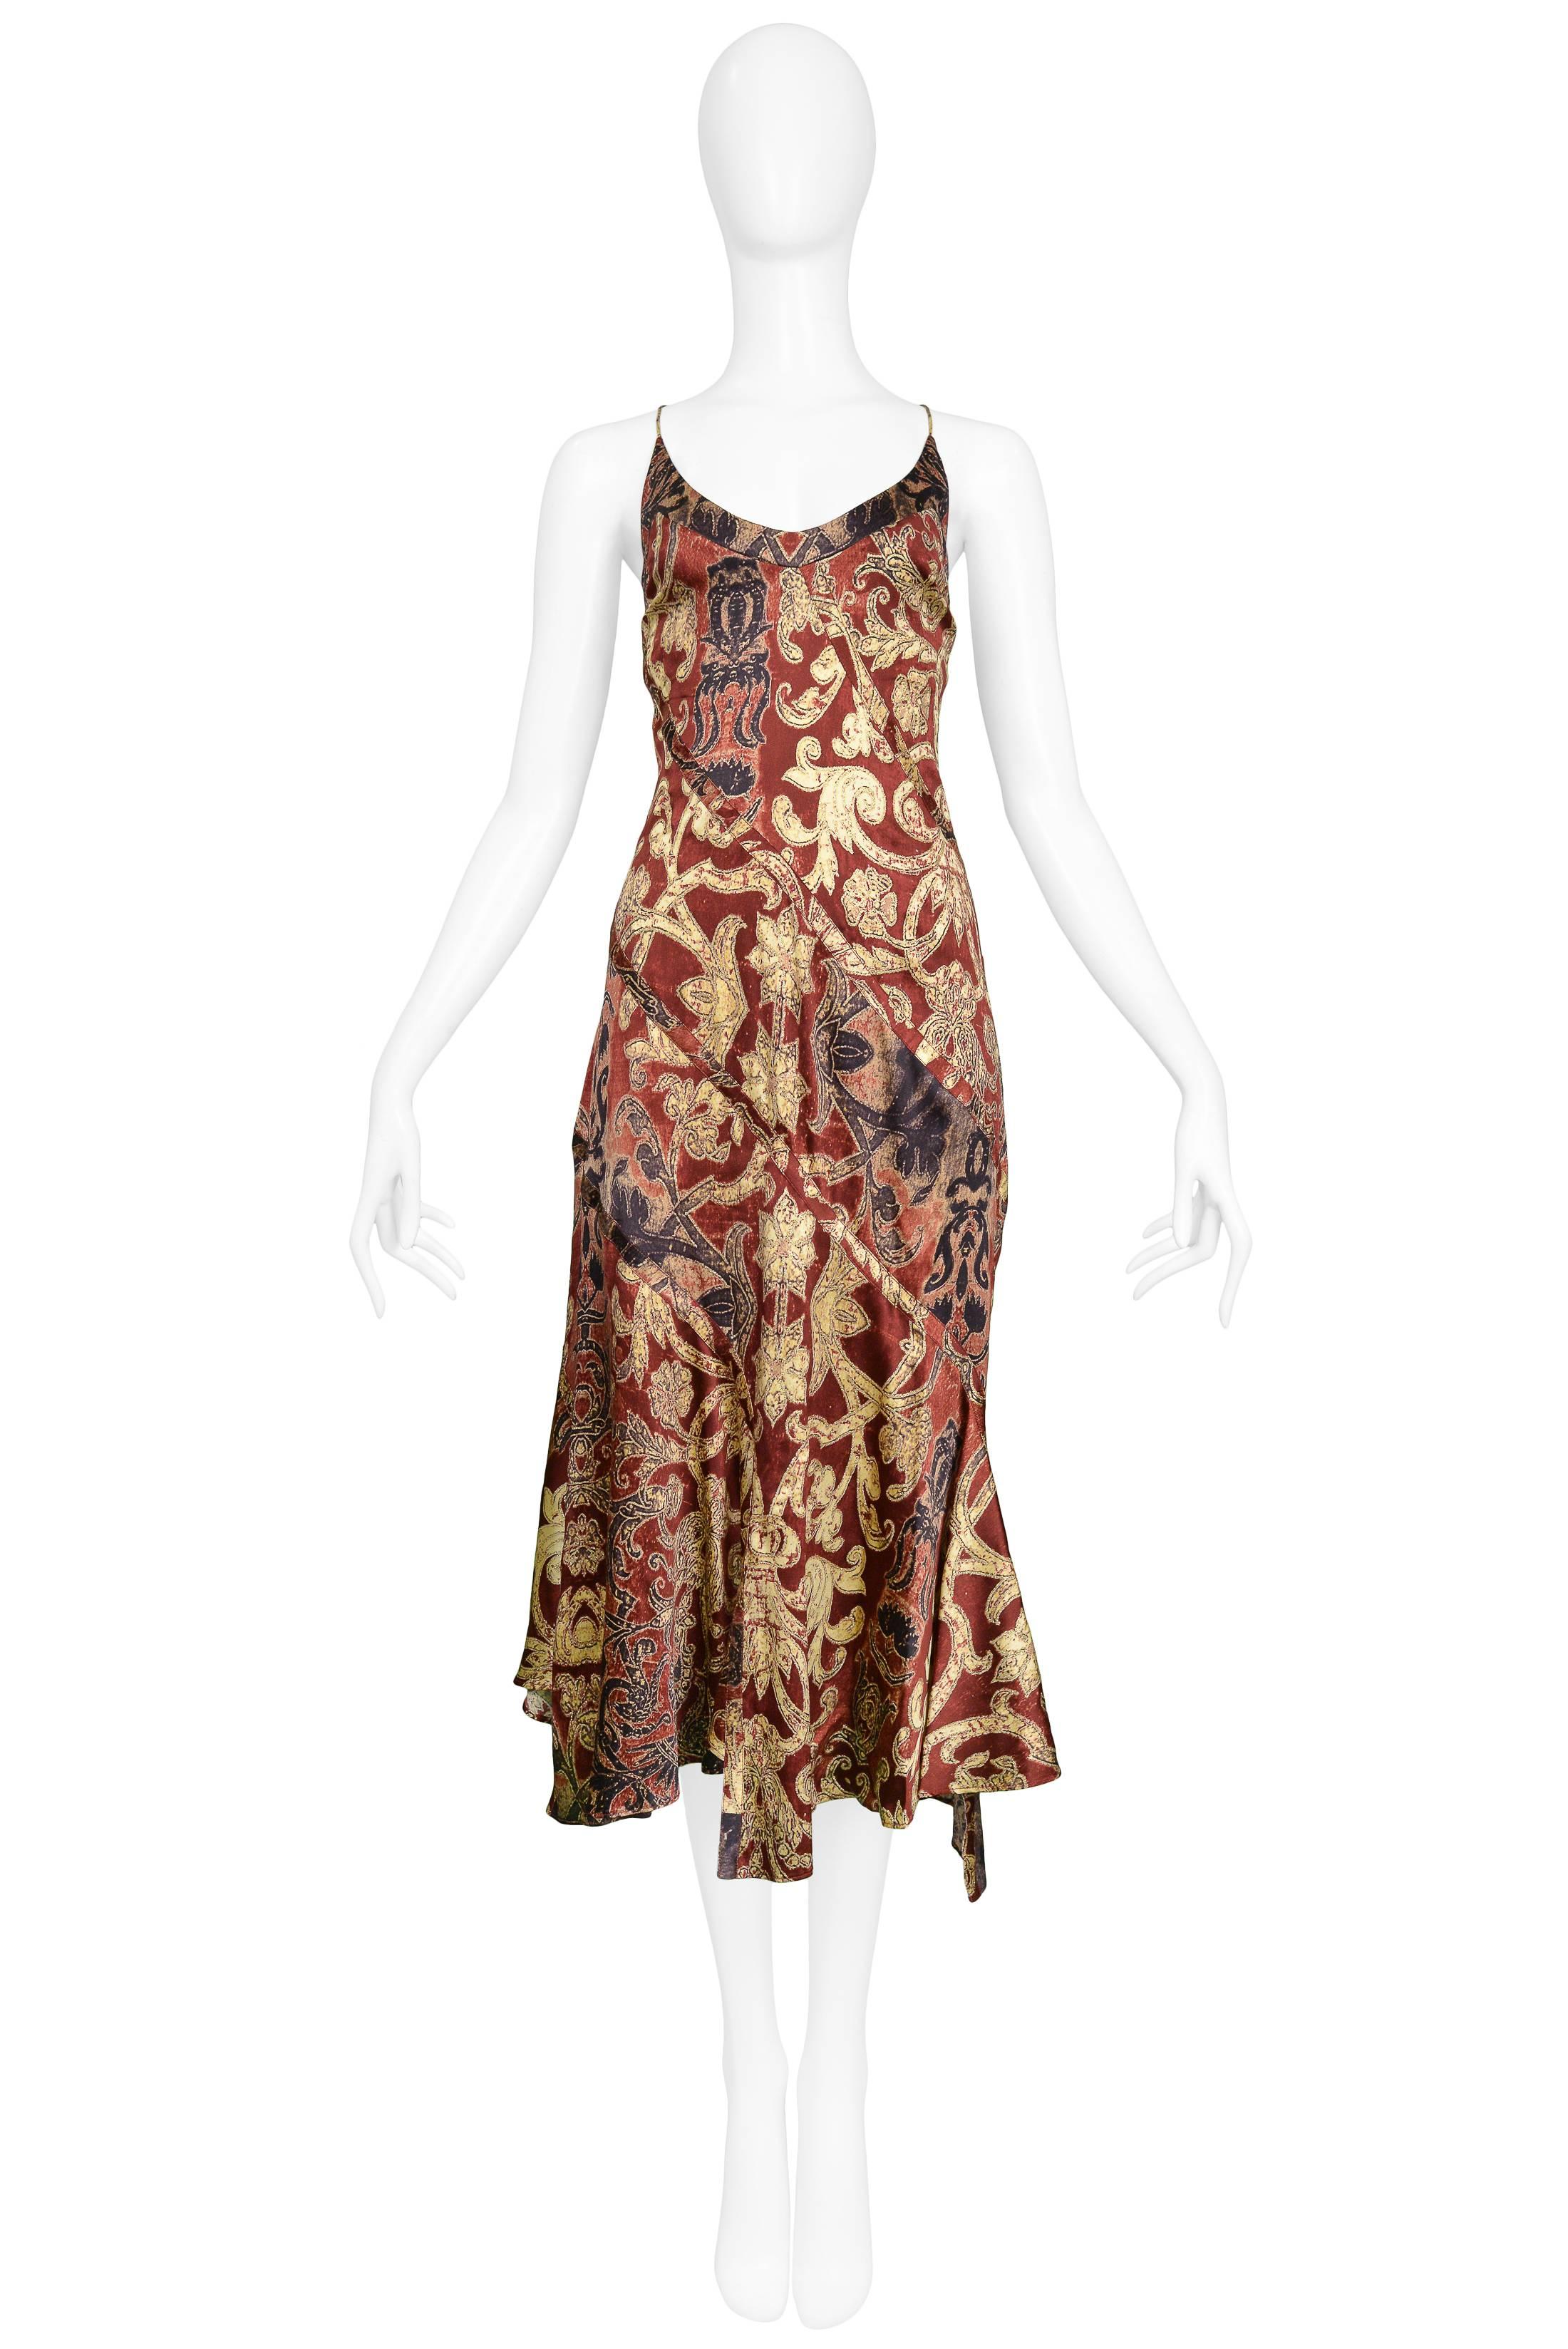 Vintage Roberto Cavalli burgundy and golden tone baroque print satin slip dress with bias cut, spaghetti straps, and open back. 

Excellent Condition. 

Size: Small
